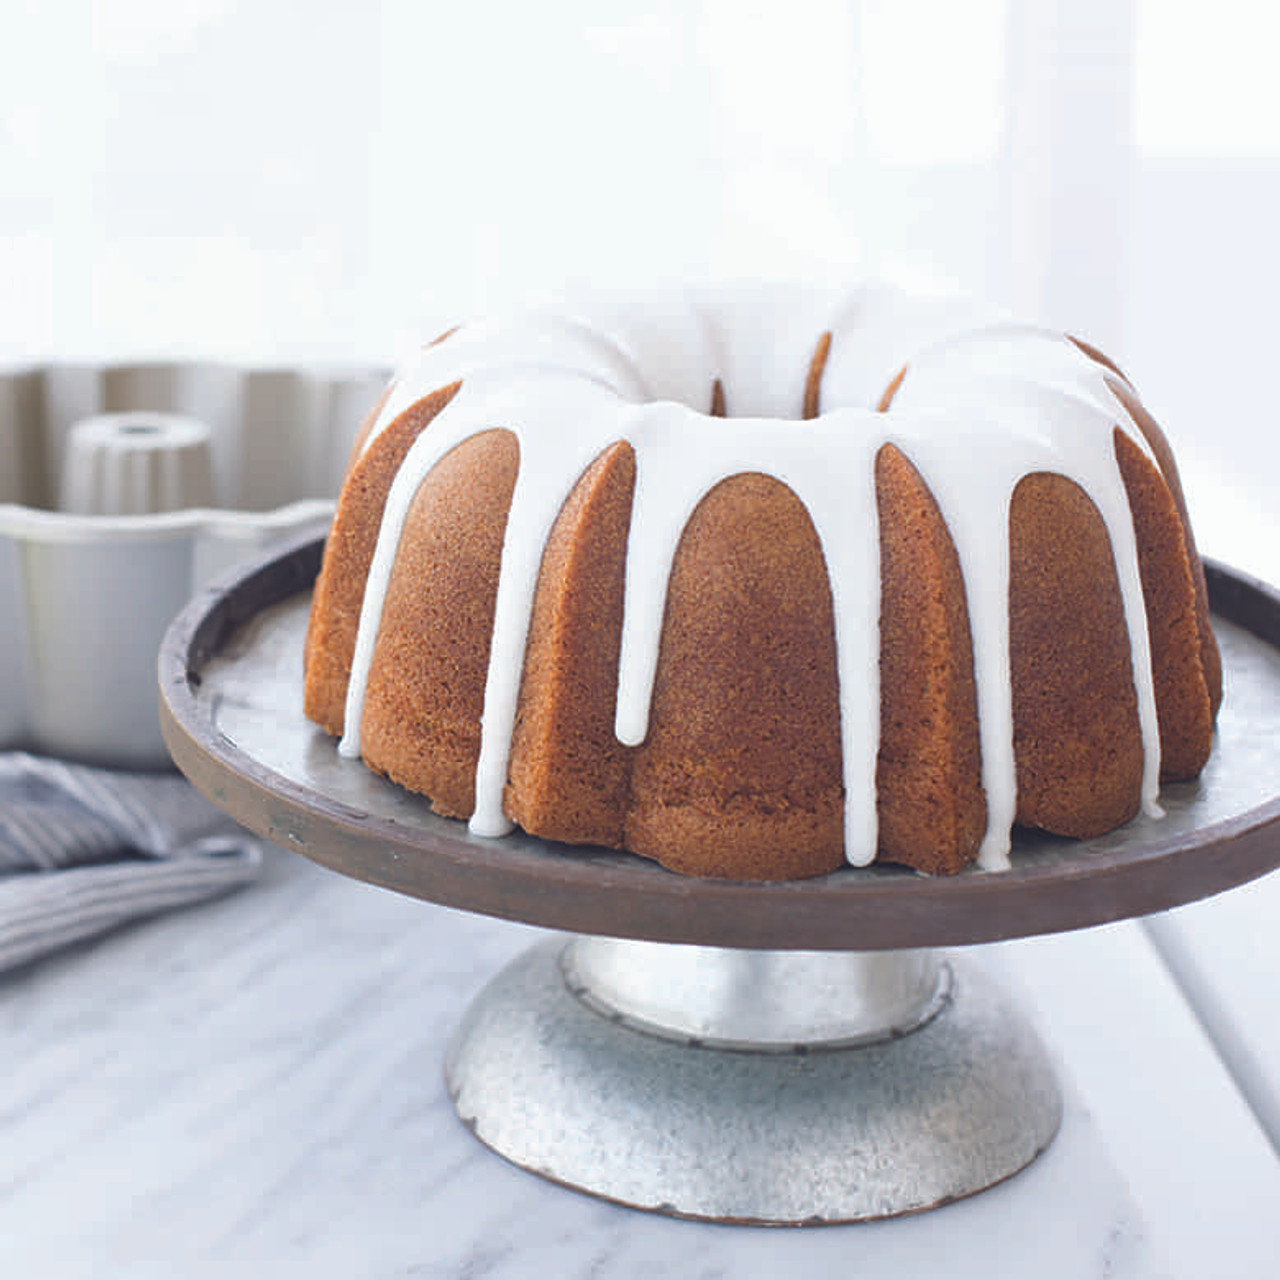 https://cdn11.bigcommerce.com/s-hccytny0od/images/stencil/1280x1280/products/720/4010/nordic-ware-anniversary-bundt-pan-1__10049.1587833623.jpg?c=2?imbypass=on